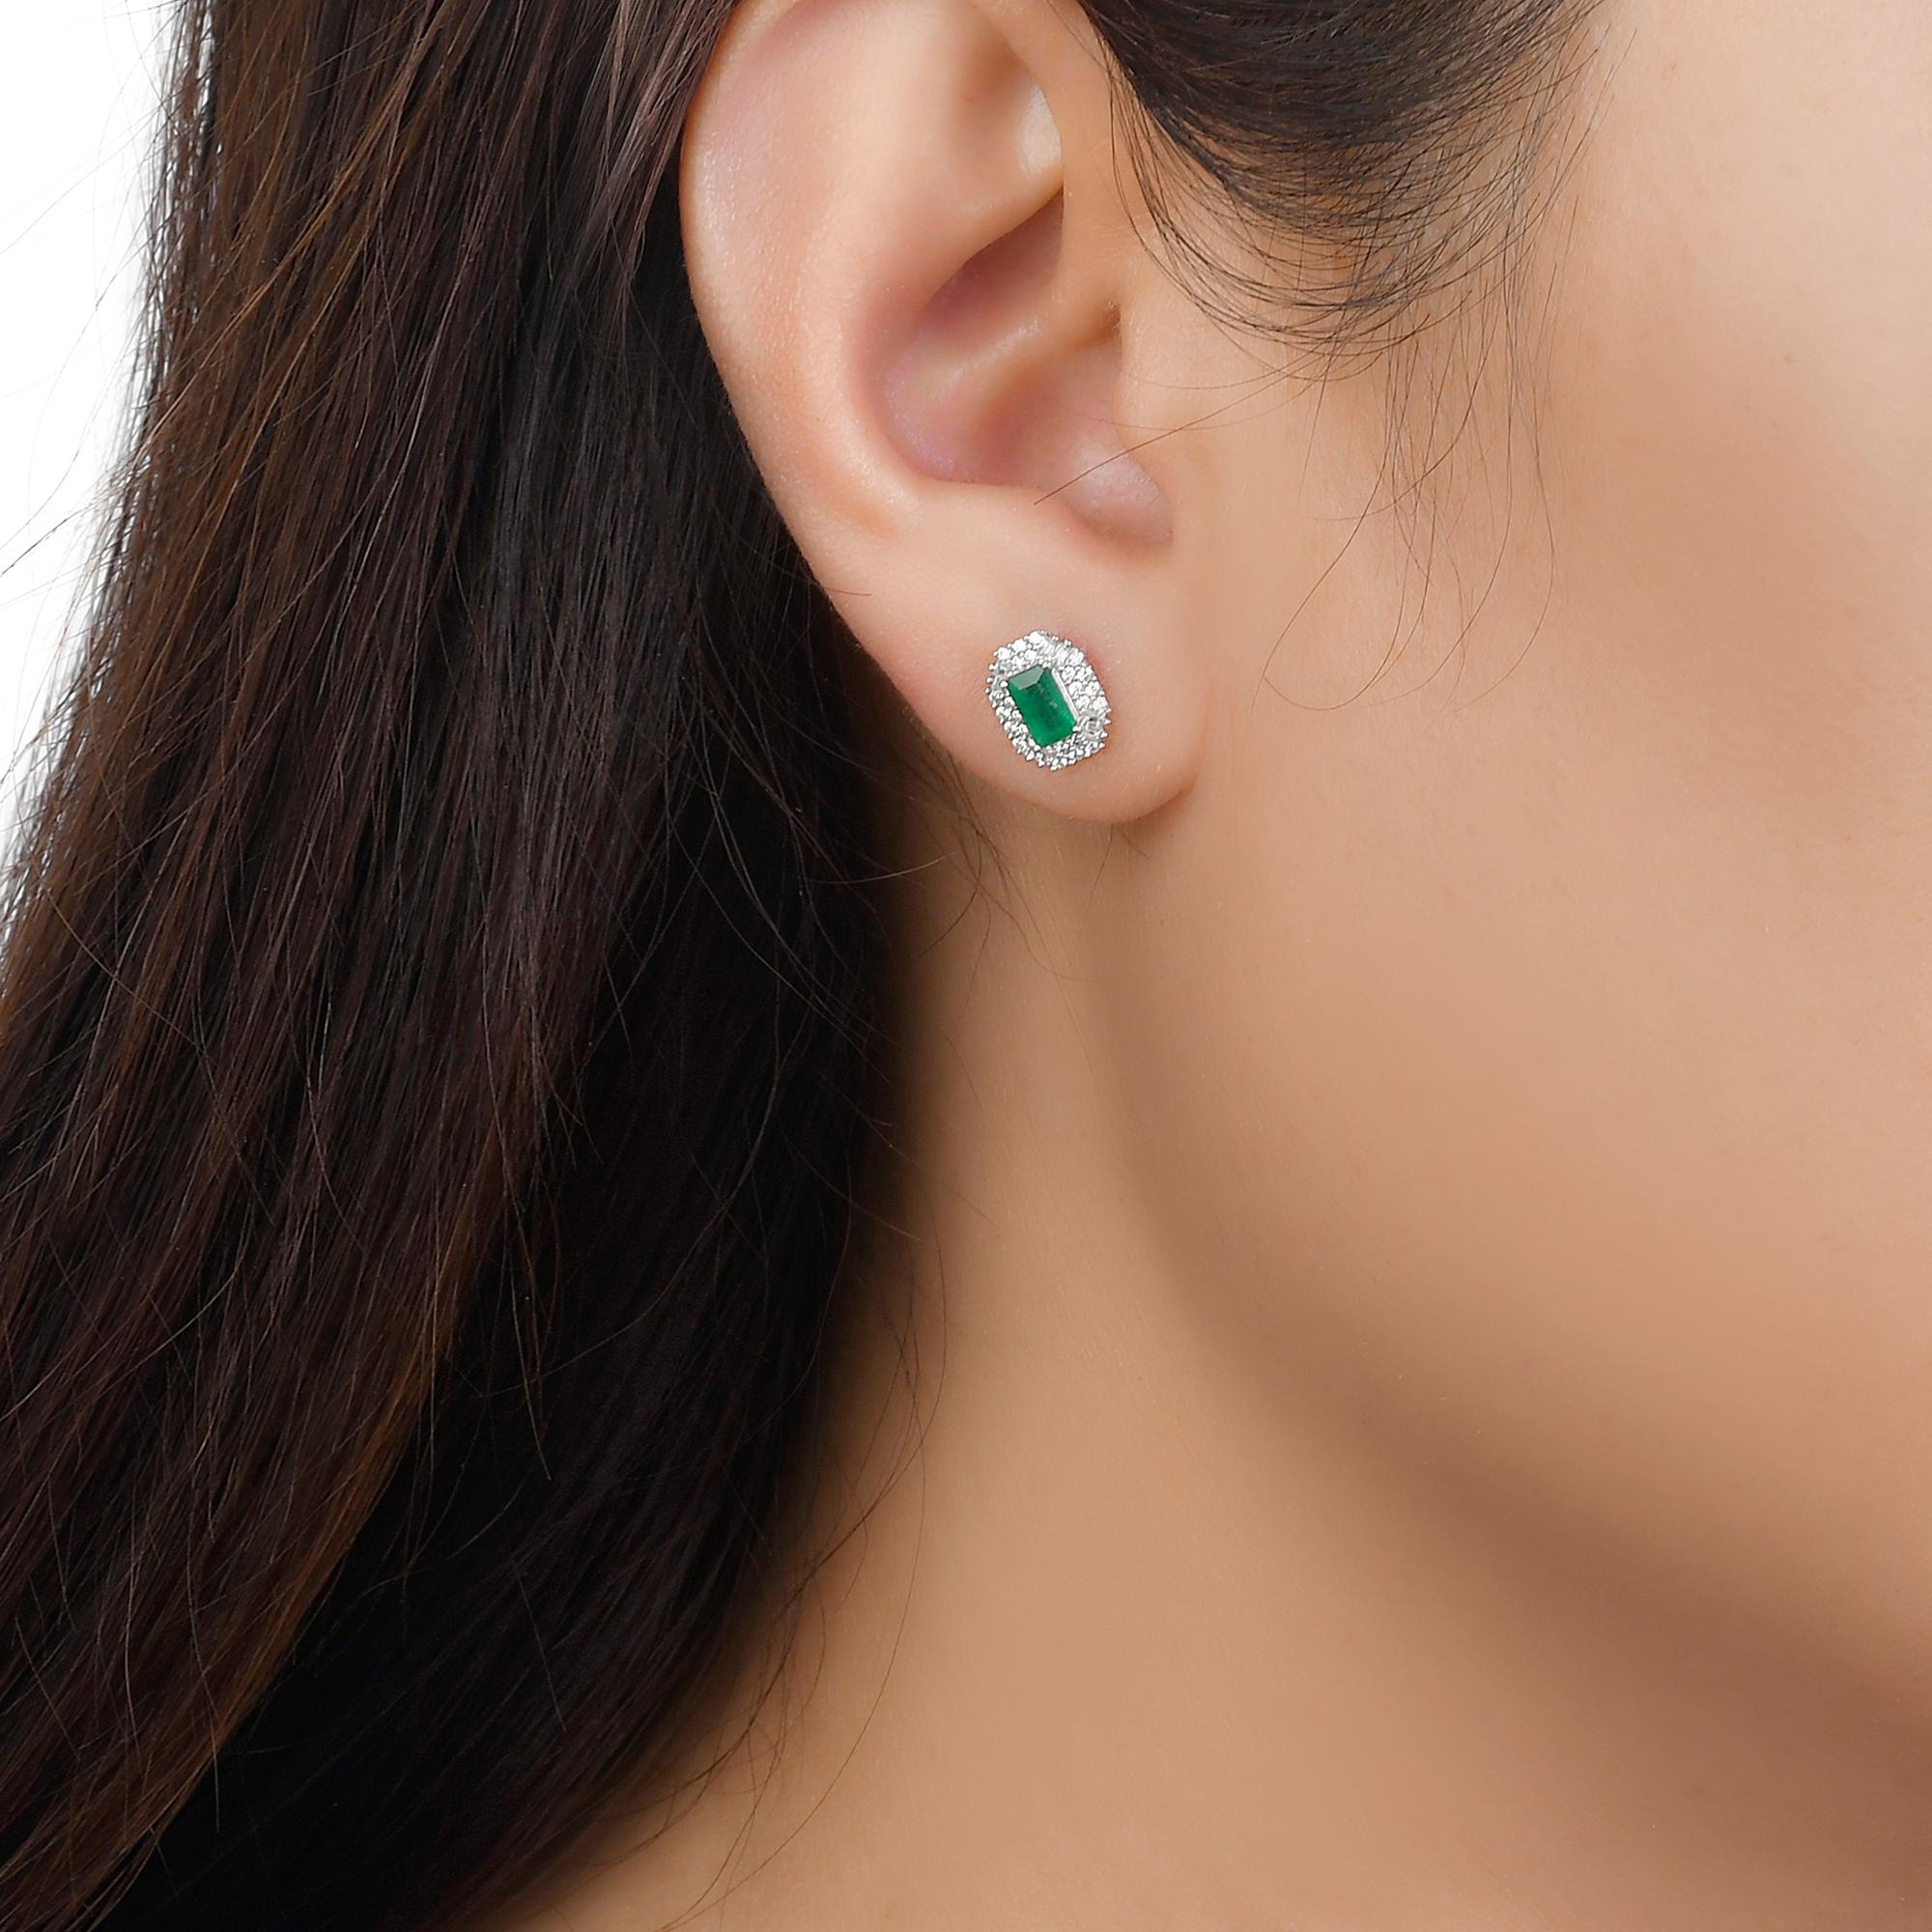 Indulge in luxury with our Emerald and Diamond Double Halo Stud Earrings. Featuring stunning baguette-cut rubies, these emerald stud earrings exude sophistication and exclusivity. The dazzling double halo design with accompanying diamonds adds an